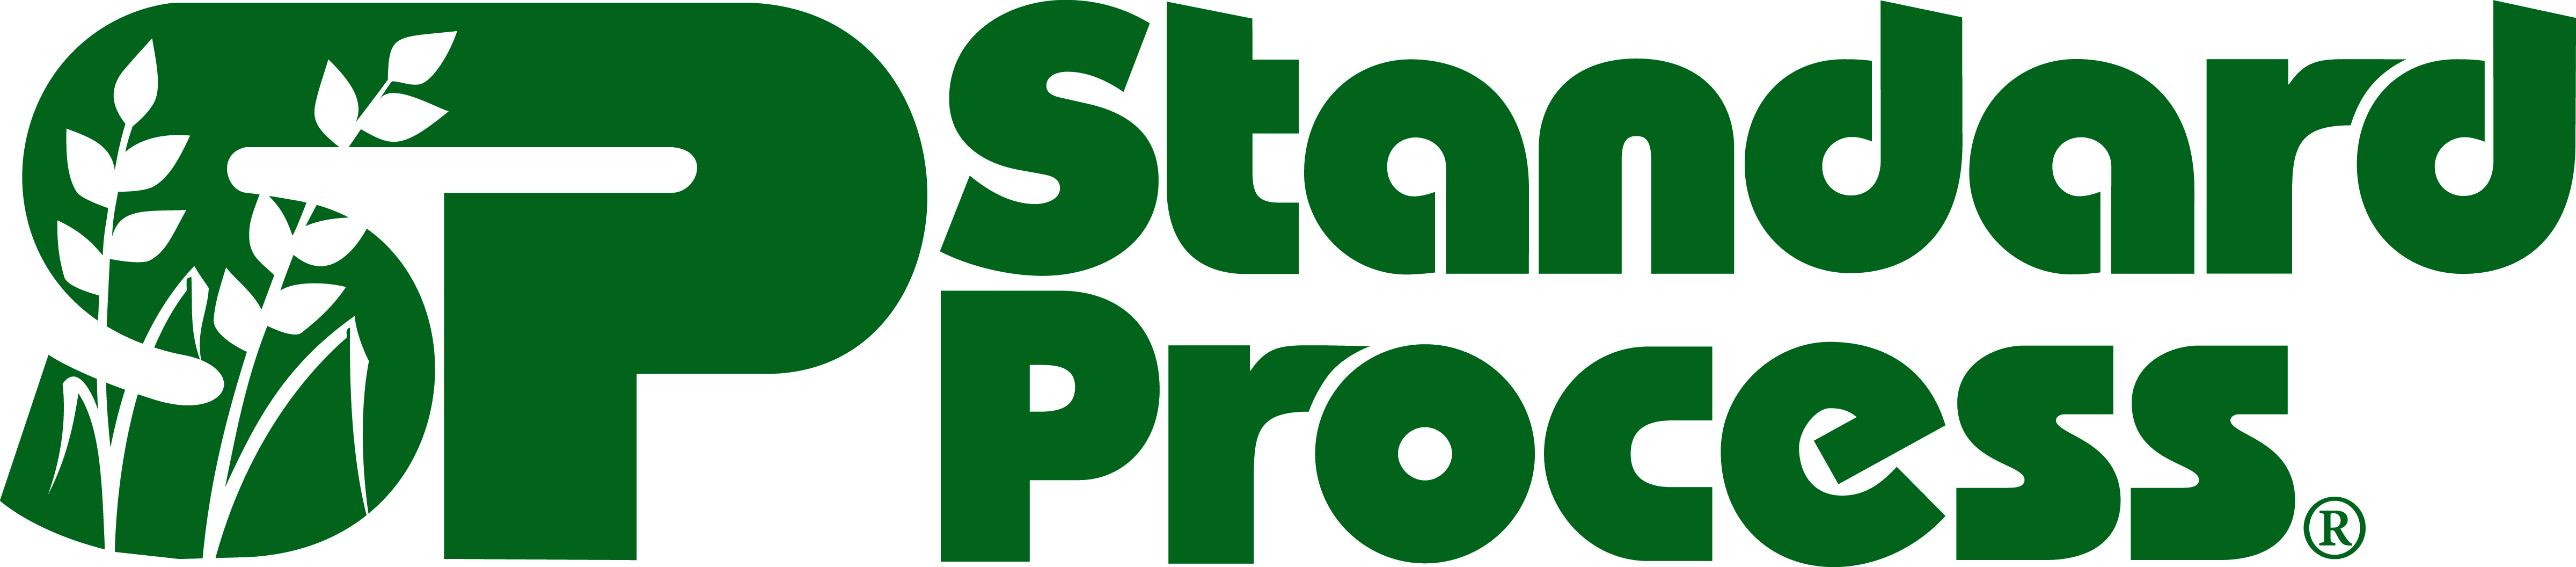 Wholistic Nutrition Leader, Standard Process, Inc. Holds Grand Opening